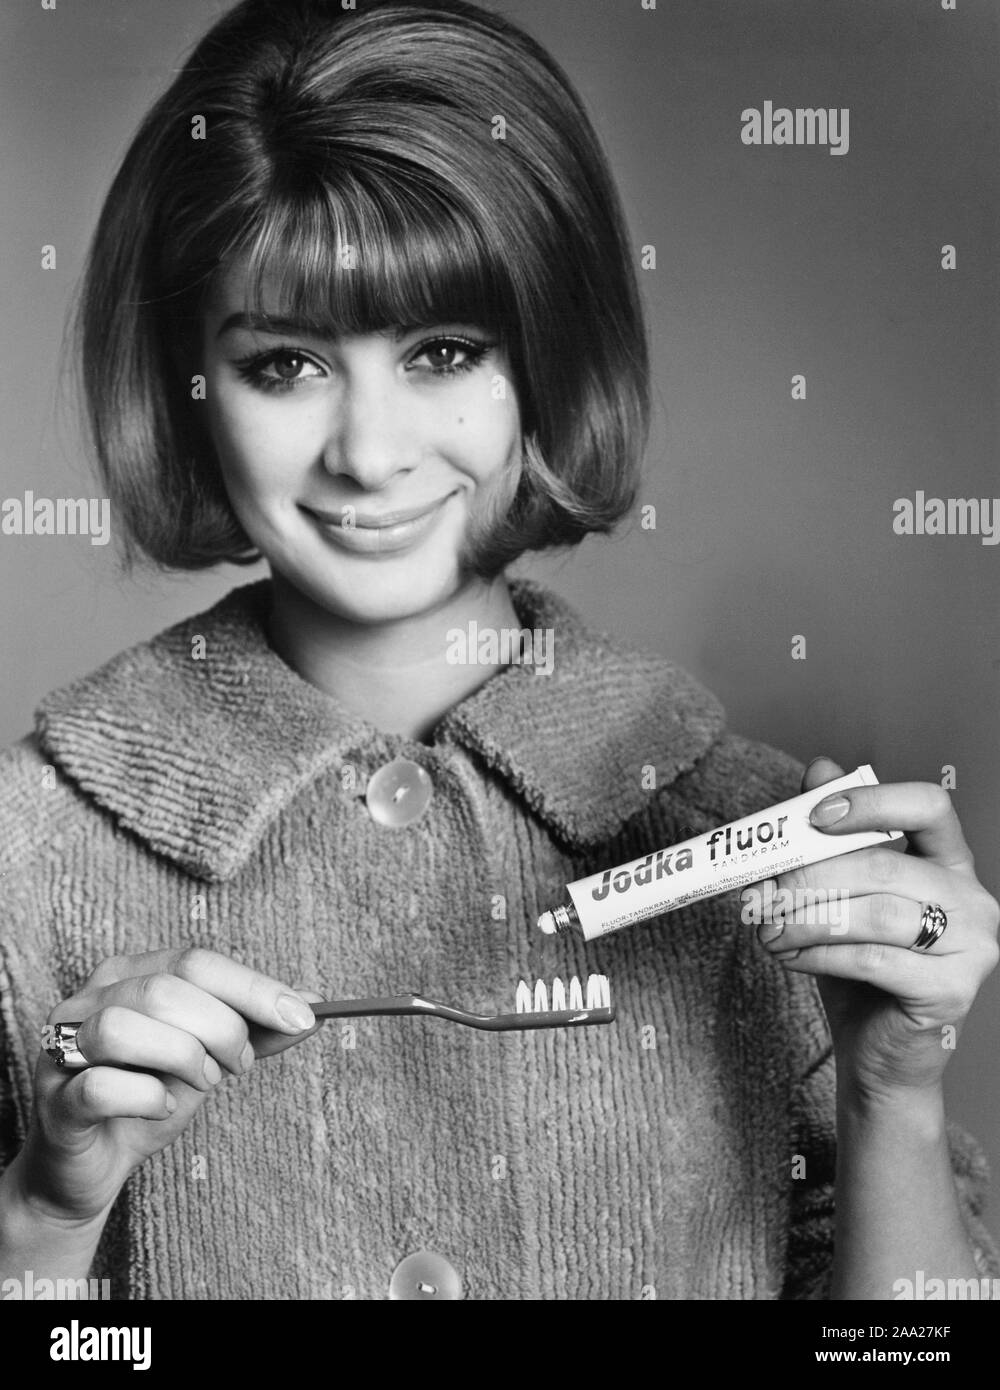 Woman in the 1960s. She is putting toothpaste on her toothbrush. Sweden 1966 Stock Photo